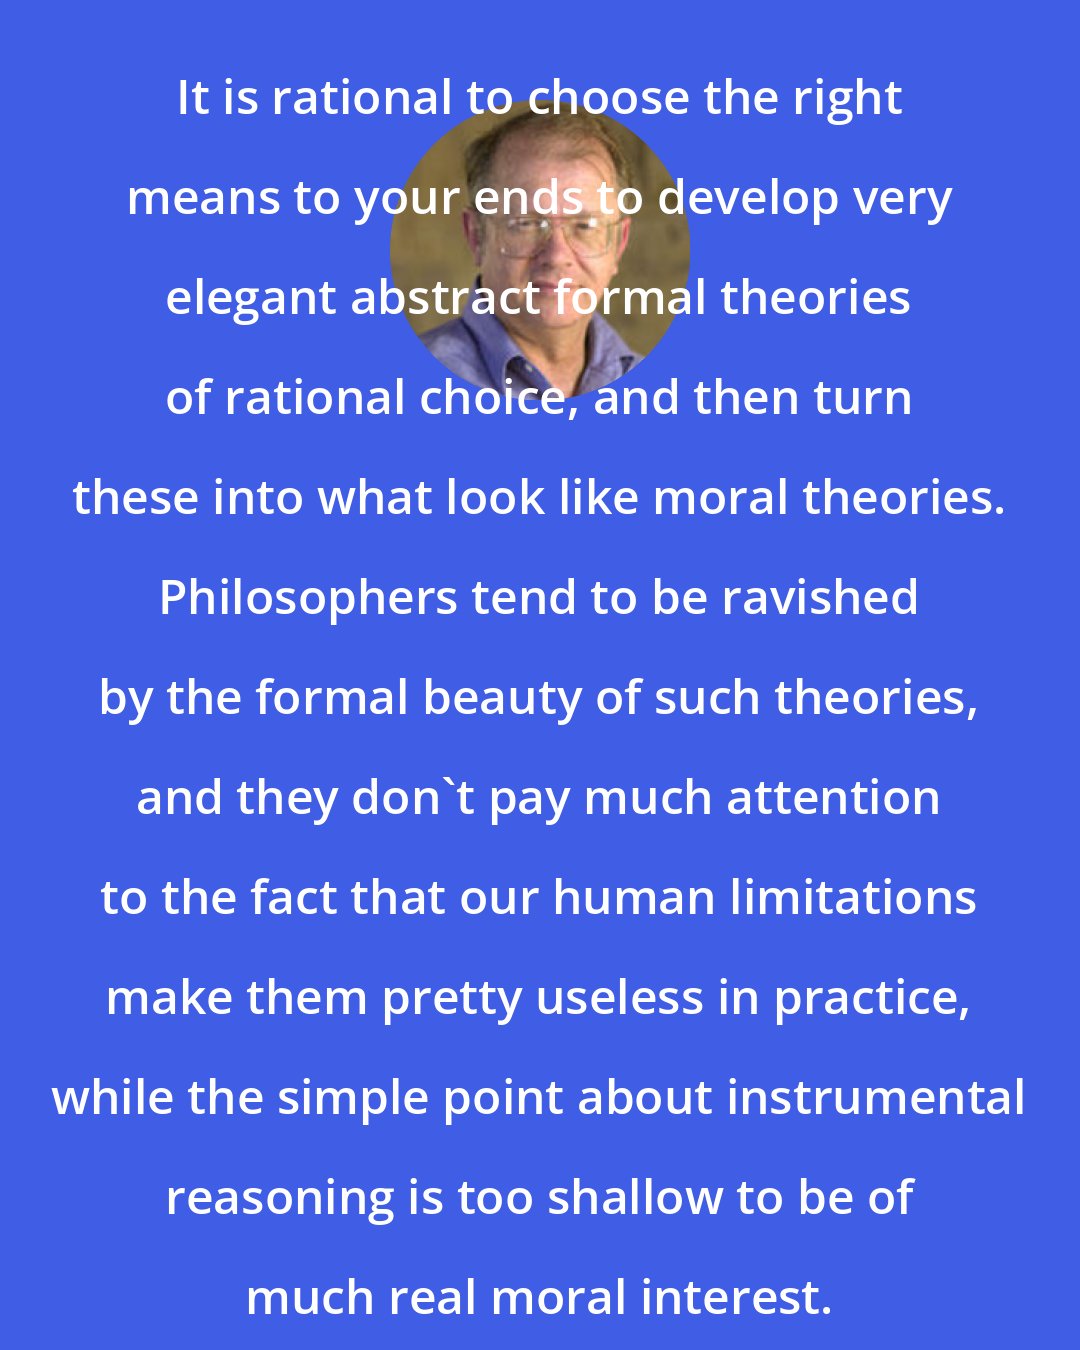 Allen W. Wood: It is rational to choose the right means to your ends to develop very elegant abstract formal theories of rational choice, and then turn these into what look like moral theories. Philosophers tend to be ravished by the formal beauty of such theories, and they don't pay much attention to the fact that our human limitations make them pretty useless in practice, while the simple point about instrumental reasoning is too shallow to be of much real moral interest.